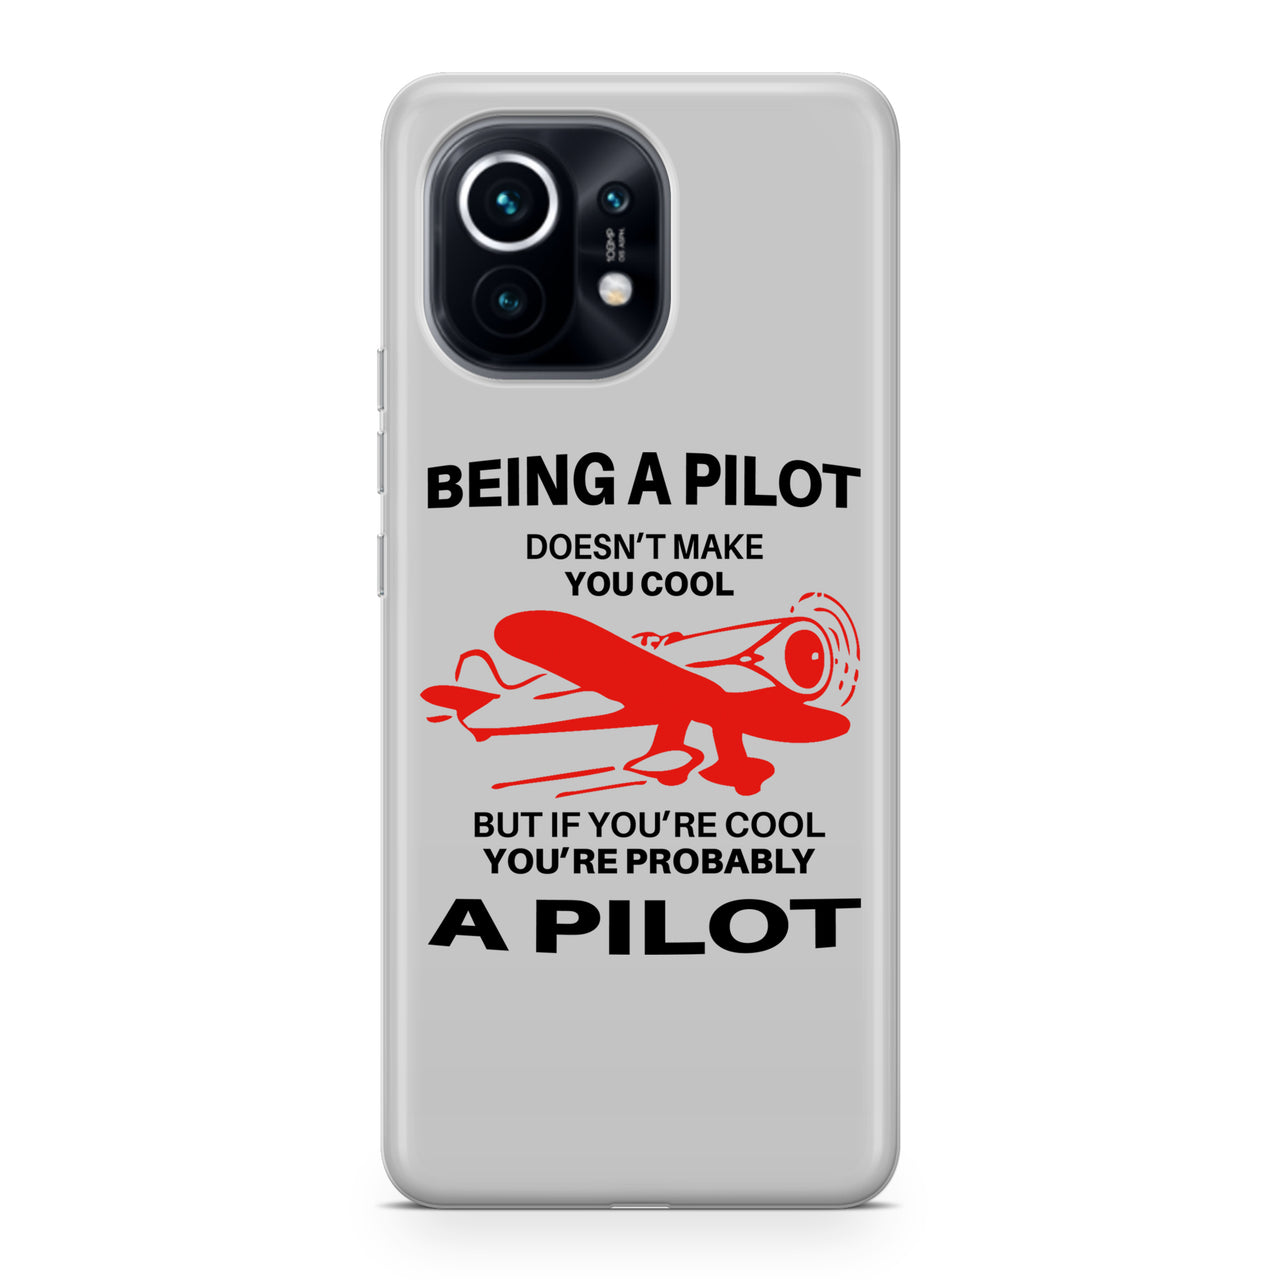 If You're Cool You're Probably a Pilot Designed Xiaomi Cases